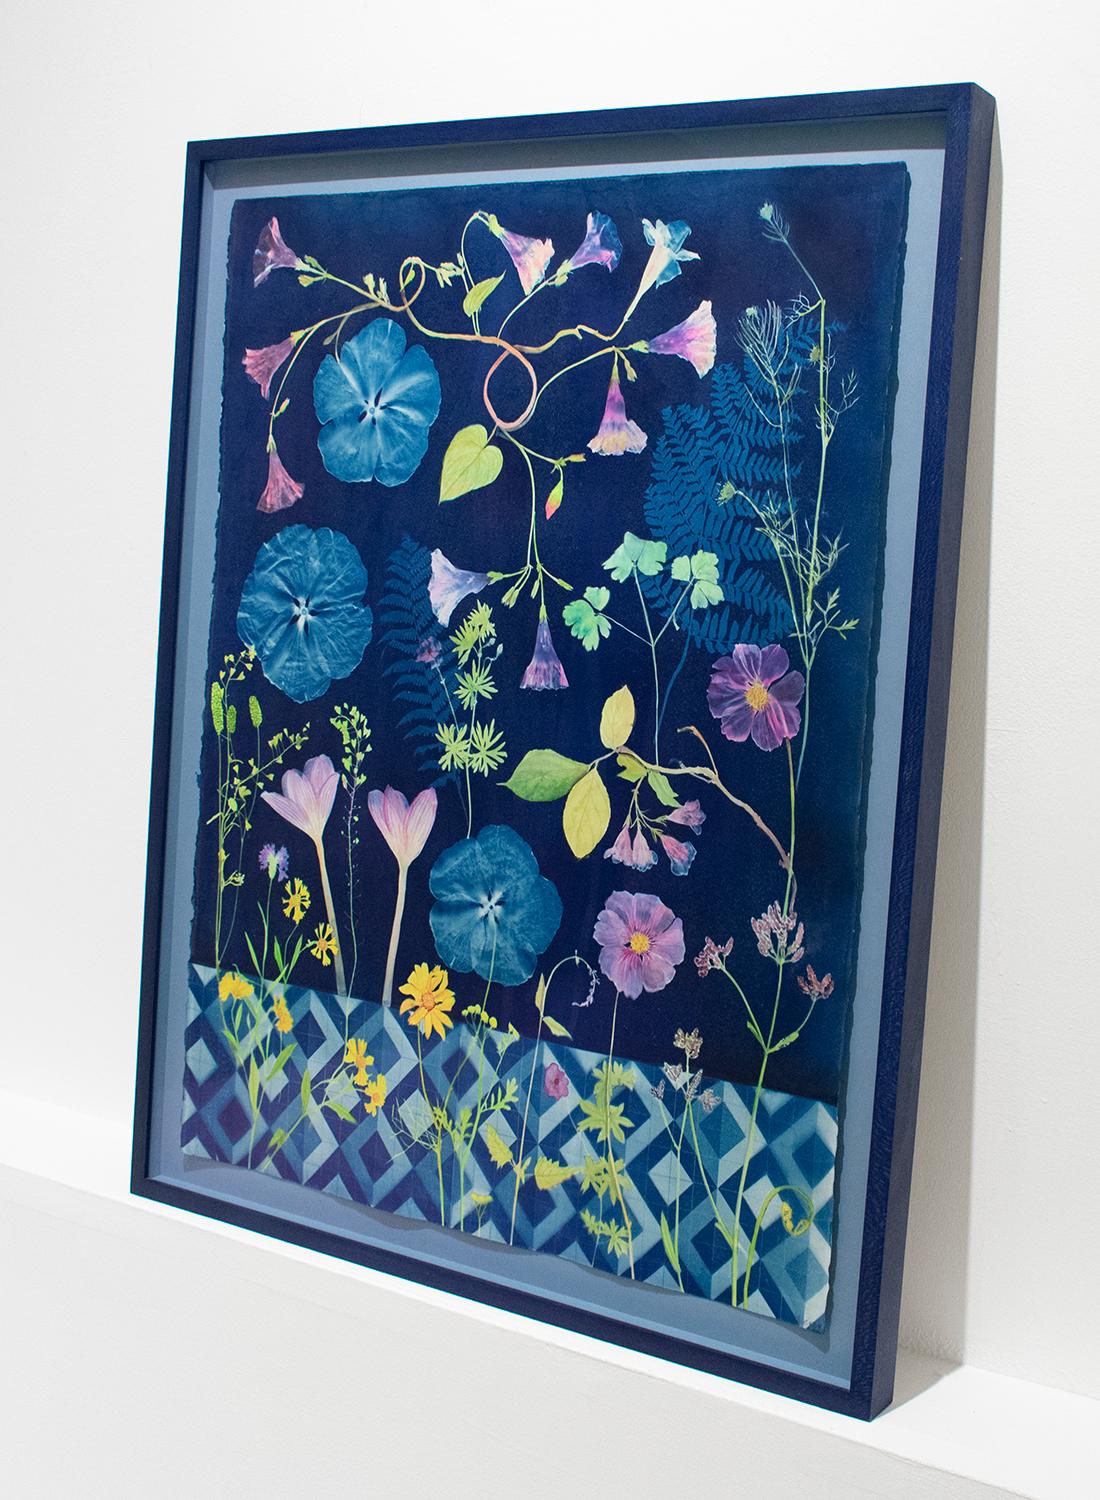 Figurative Still Life painting with morning glories, crocuses, ferns, and geometric floor pattern on an indigo cyanotype background
